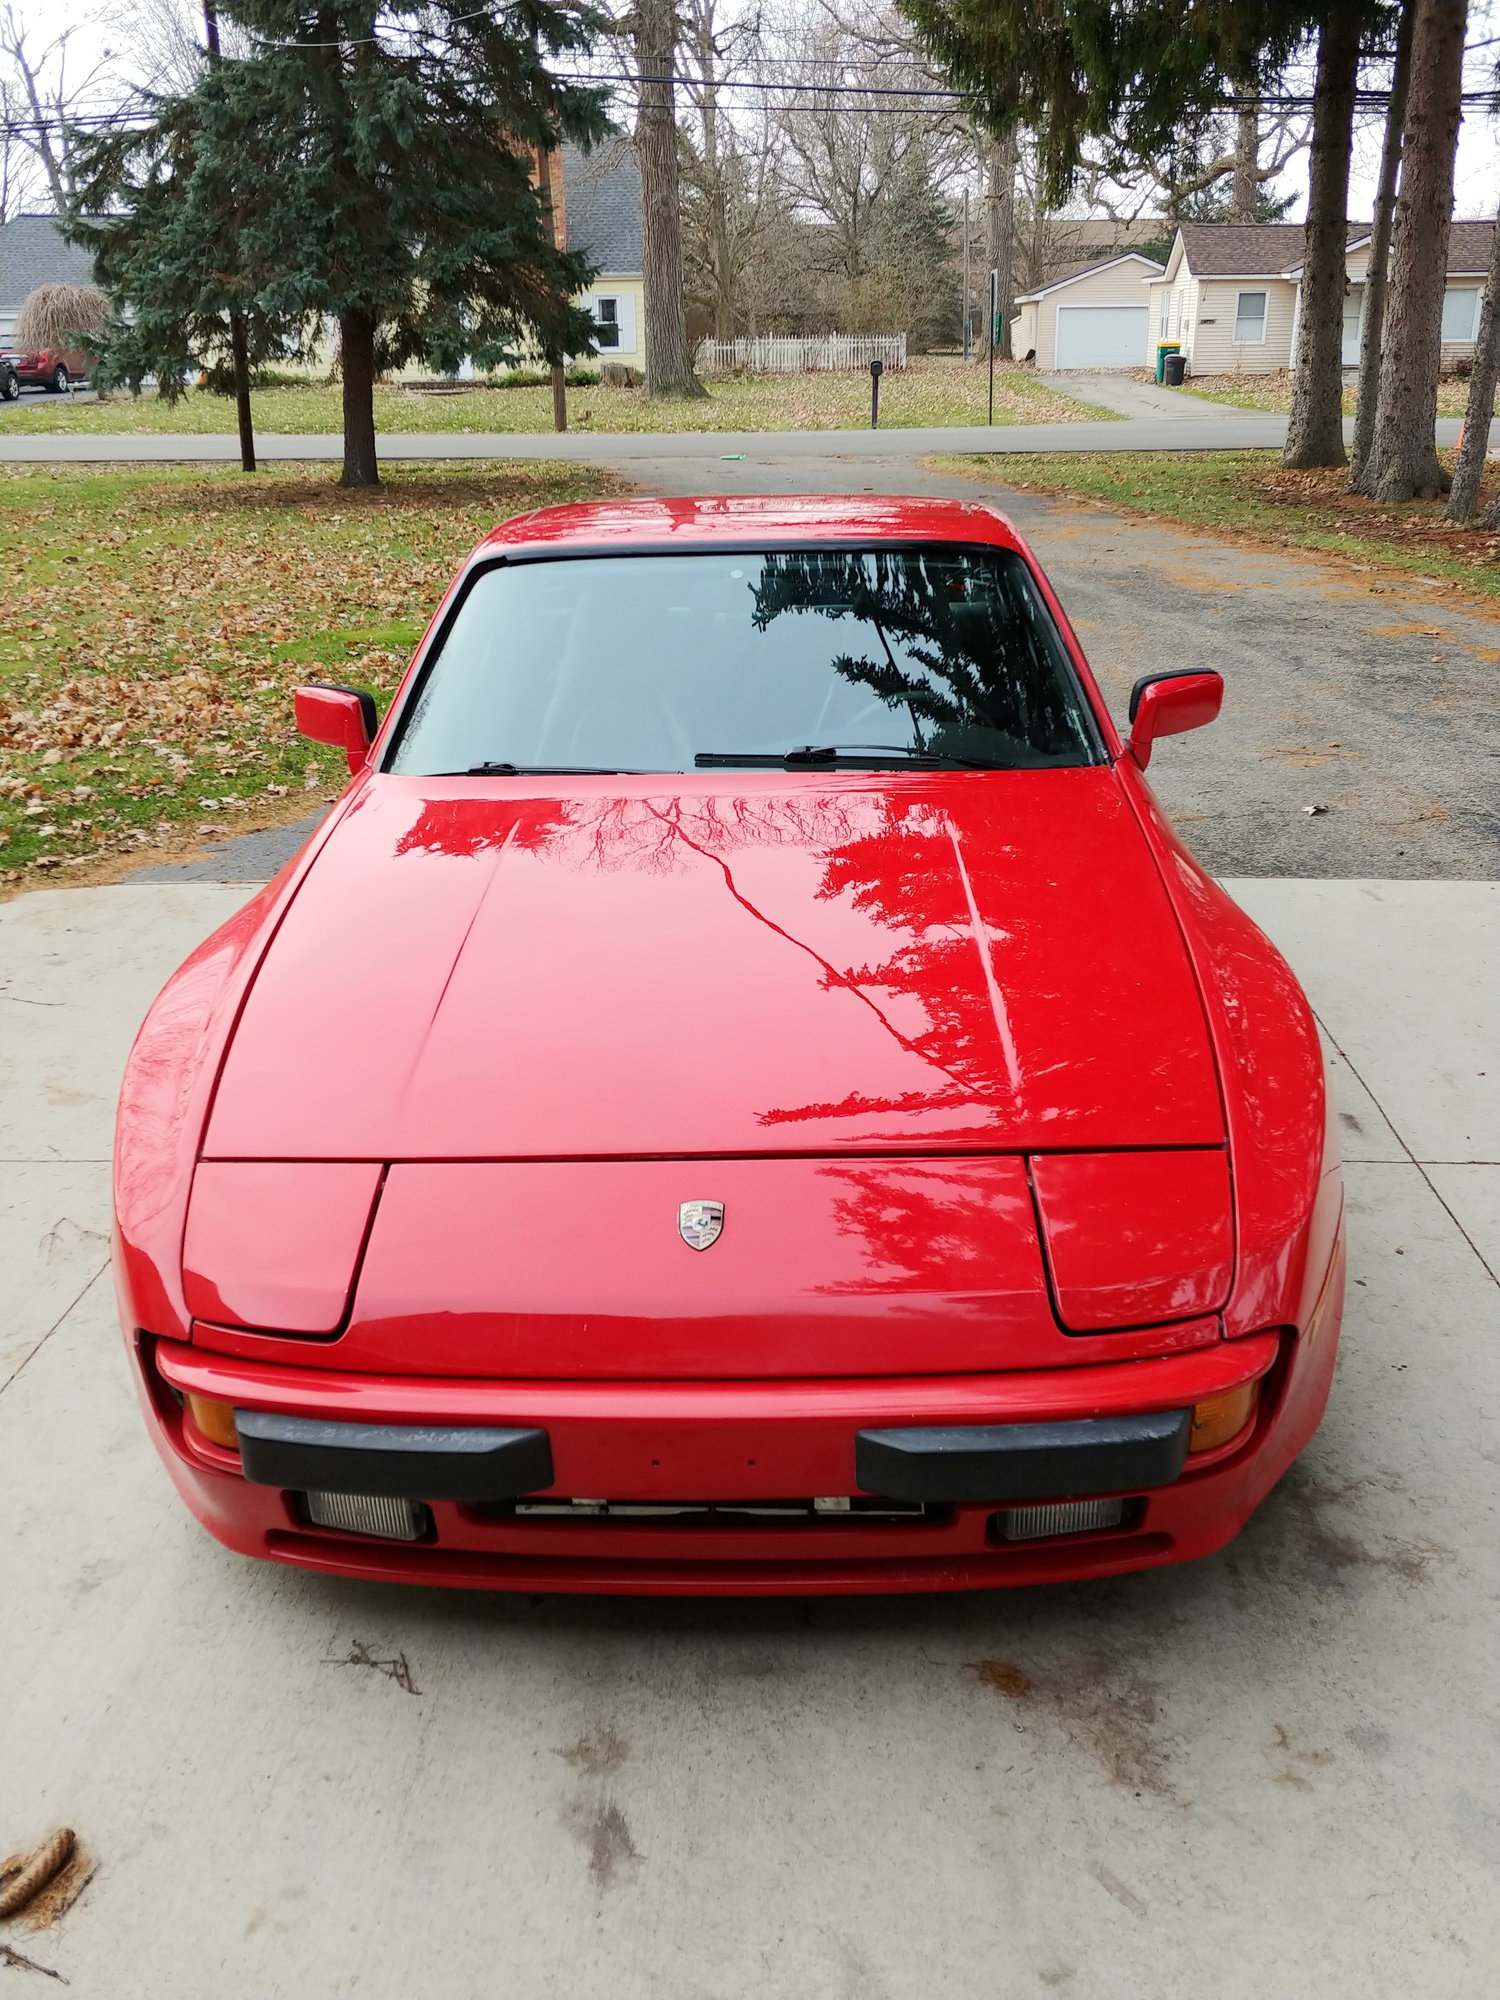 1984 Porsche 944 - Guards Red Porsche 944 - LS3, 01E 6 speed, 18Z Big Brakes, AC, Power Steering - Used - VIN WP0AA0946EN461317 - 100,000 Miles - 8 cyl - 2WD - Manual - Coupe - Red - Farmington Hills, MI 48334, United States